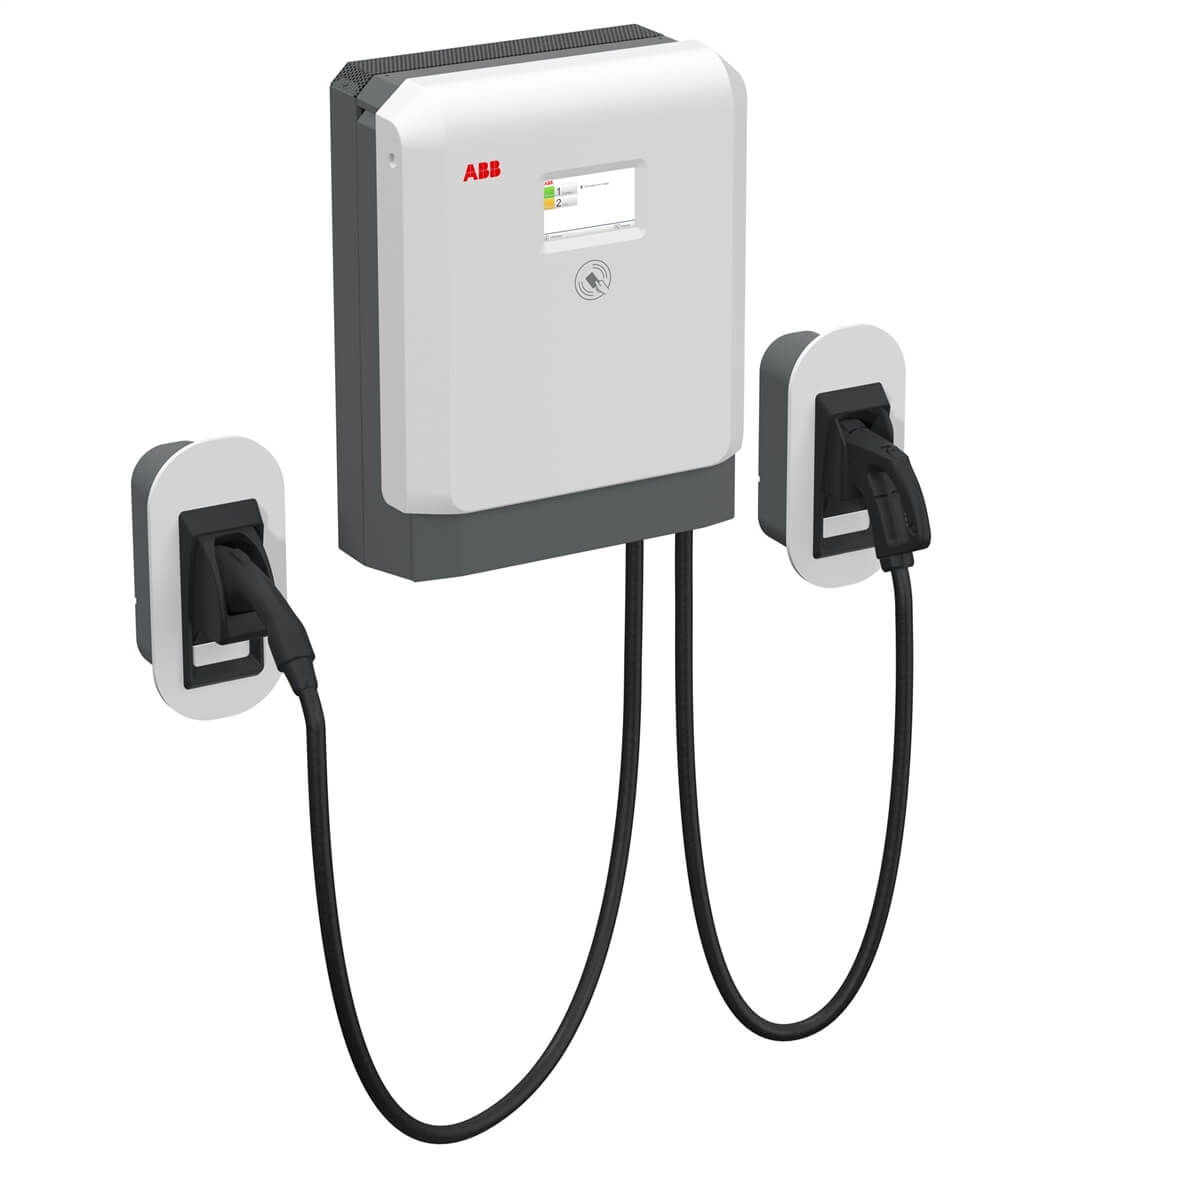 ABB-Terra-DC-Wallbox-EV-Charger-Commercial-Home-Charging-Station-Electric-Vehicle-Automotive-C-Store-Gas-Station-Disaster-Relief-Healthcare-Government-Military-Municipal-Retail-Warehouse-Optimum-Energy-Services